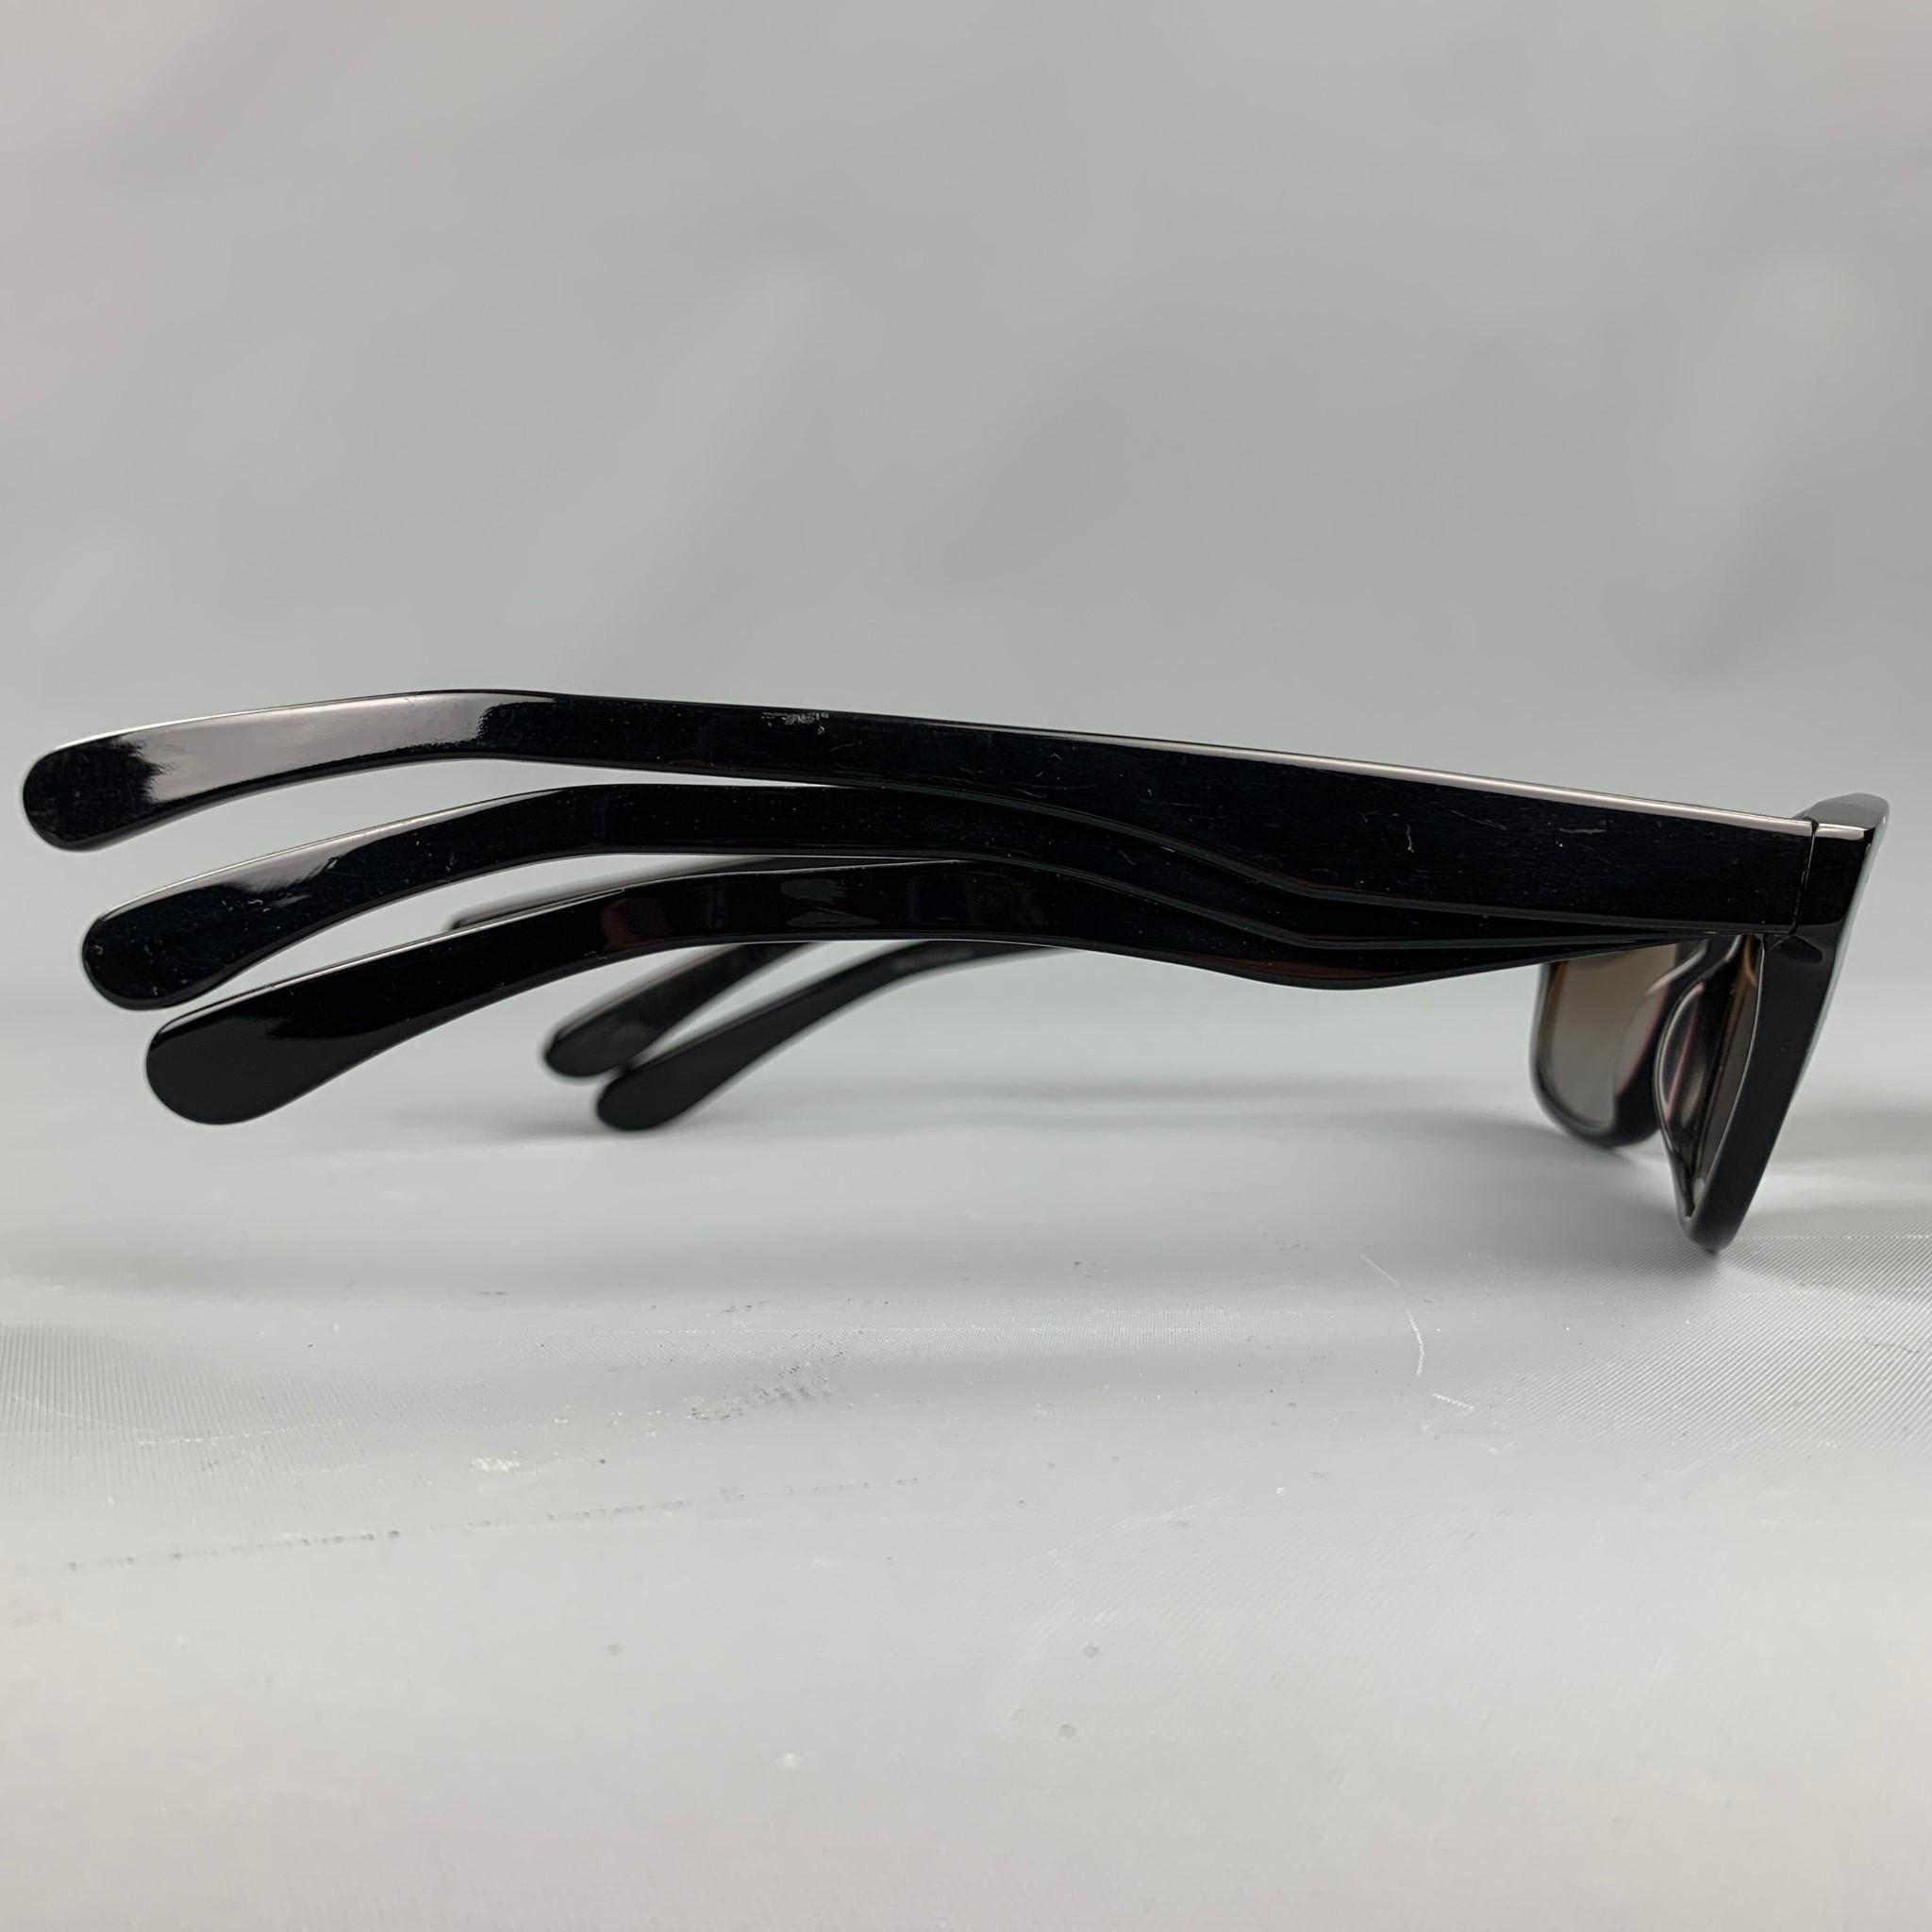 Vintage JEAN PAUL GAULTIER by MIKLI sunglasses comes in a black acetate featuring a three arm style and a oval shape. Made in France. As-Is.

Good Pre-Owned Condition.
Marked: GL1101 0101 4520

Measurements:

Length: 16 cm.
Height: 4 cm. 